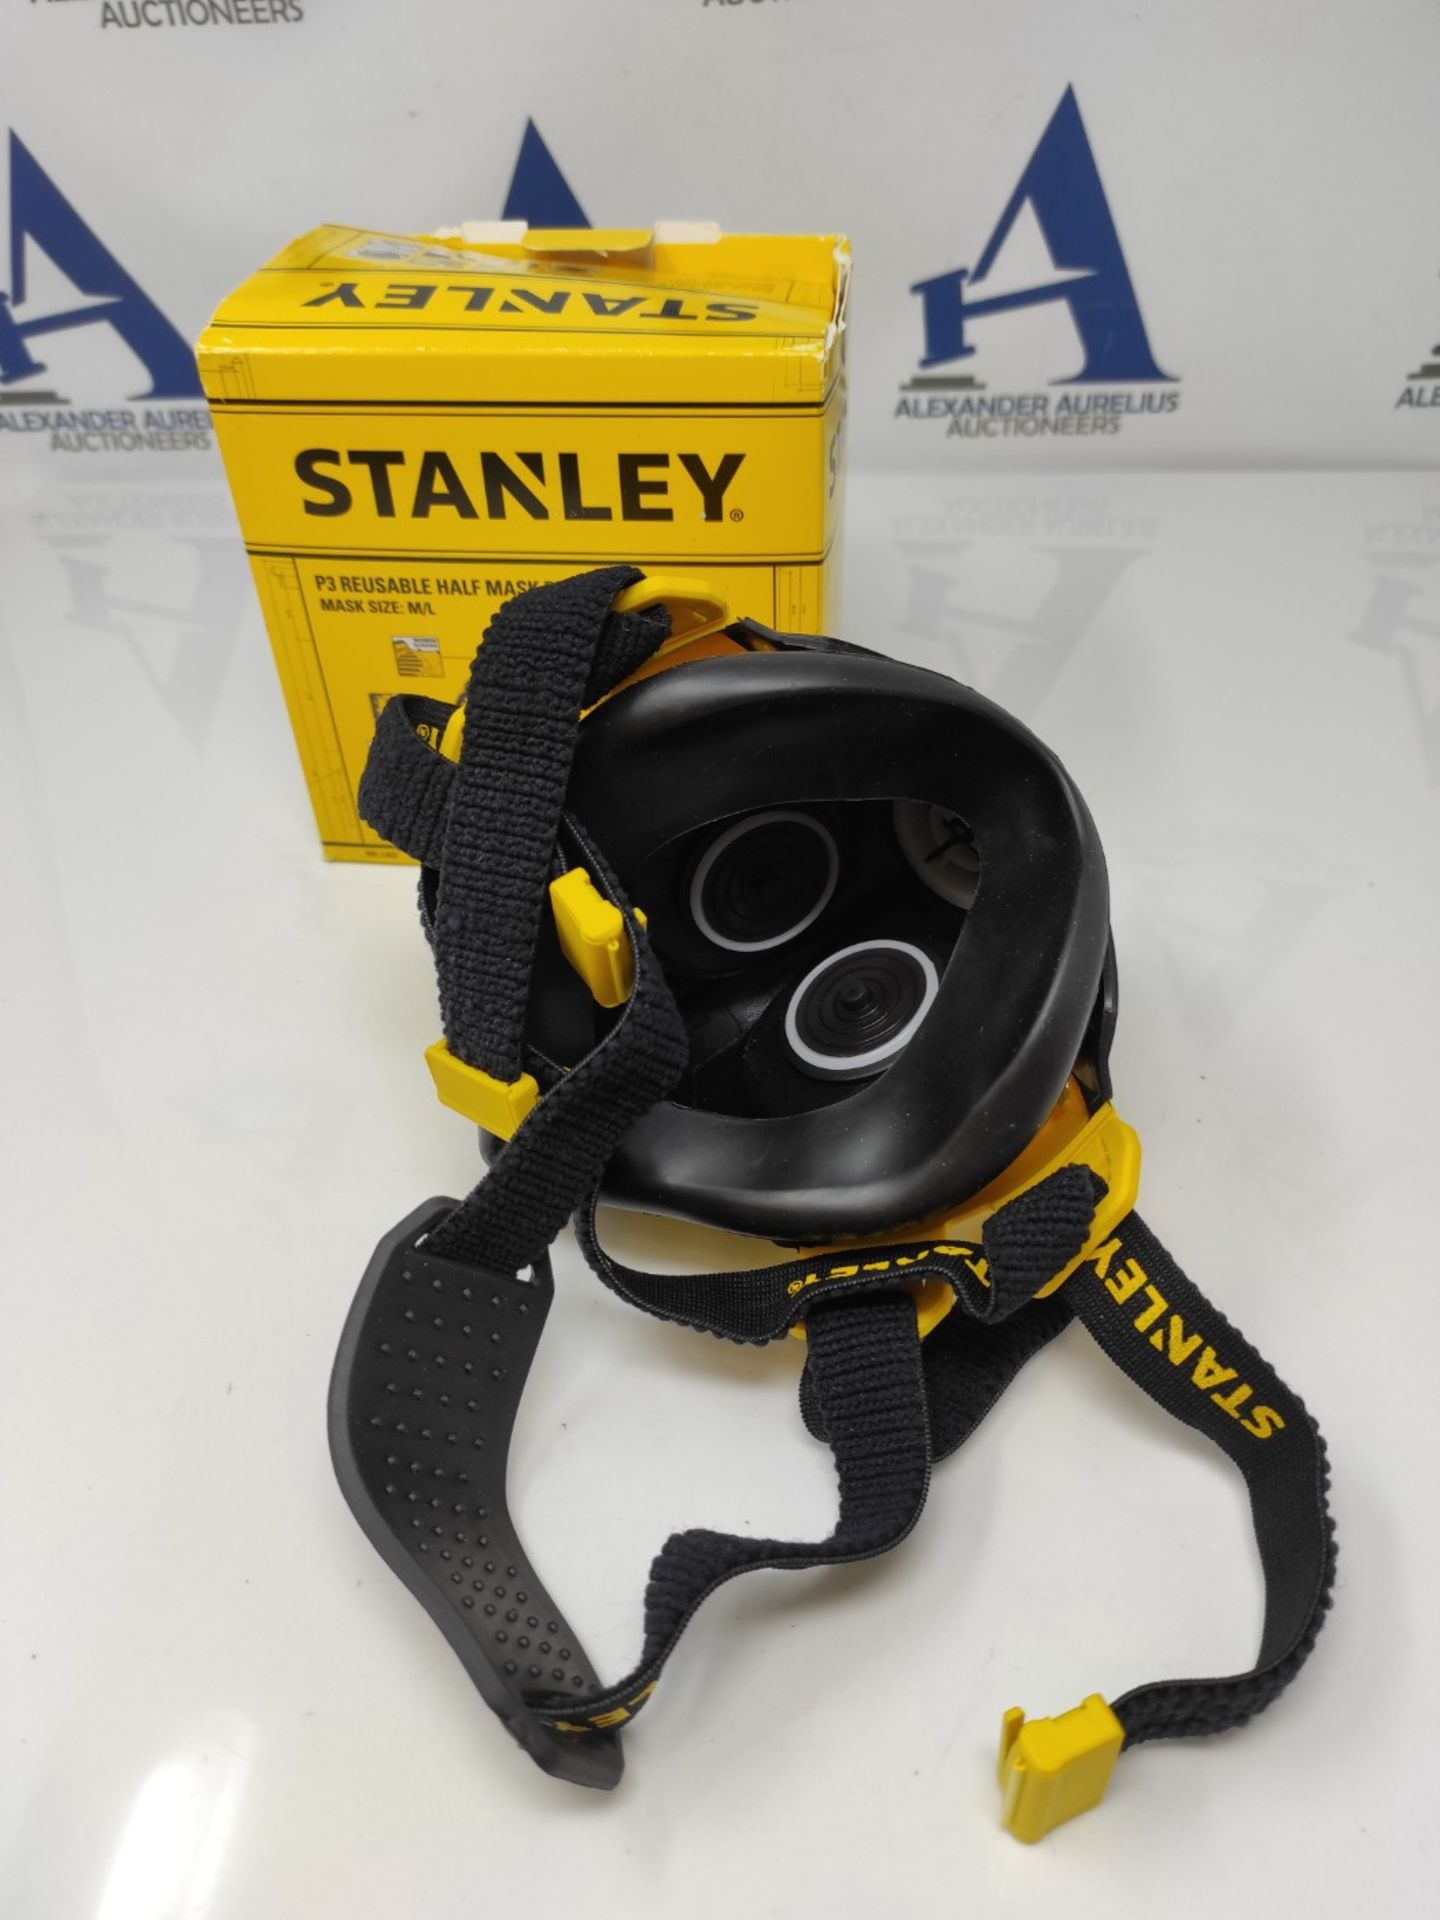 Stanley P3 Dust Mask, Reusable Respirator Mask with Face-Fit-Check Technology & Maximu - Bild 2 aus 2